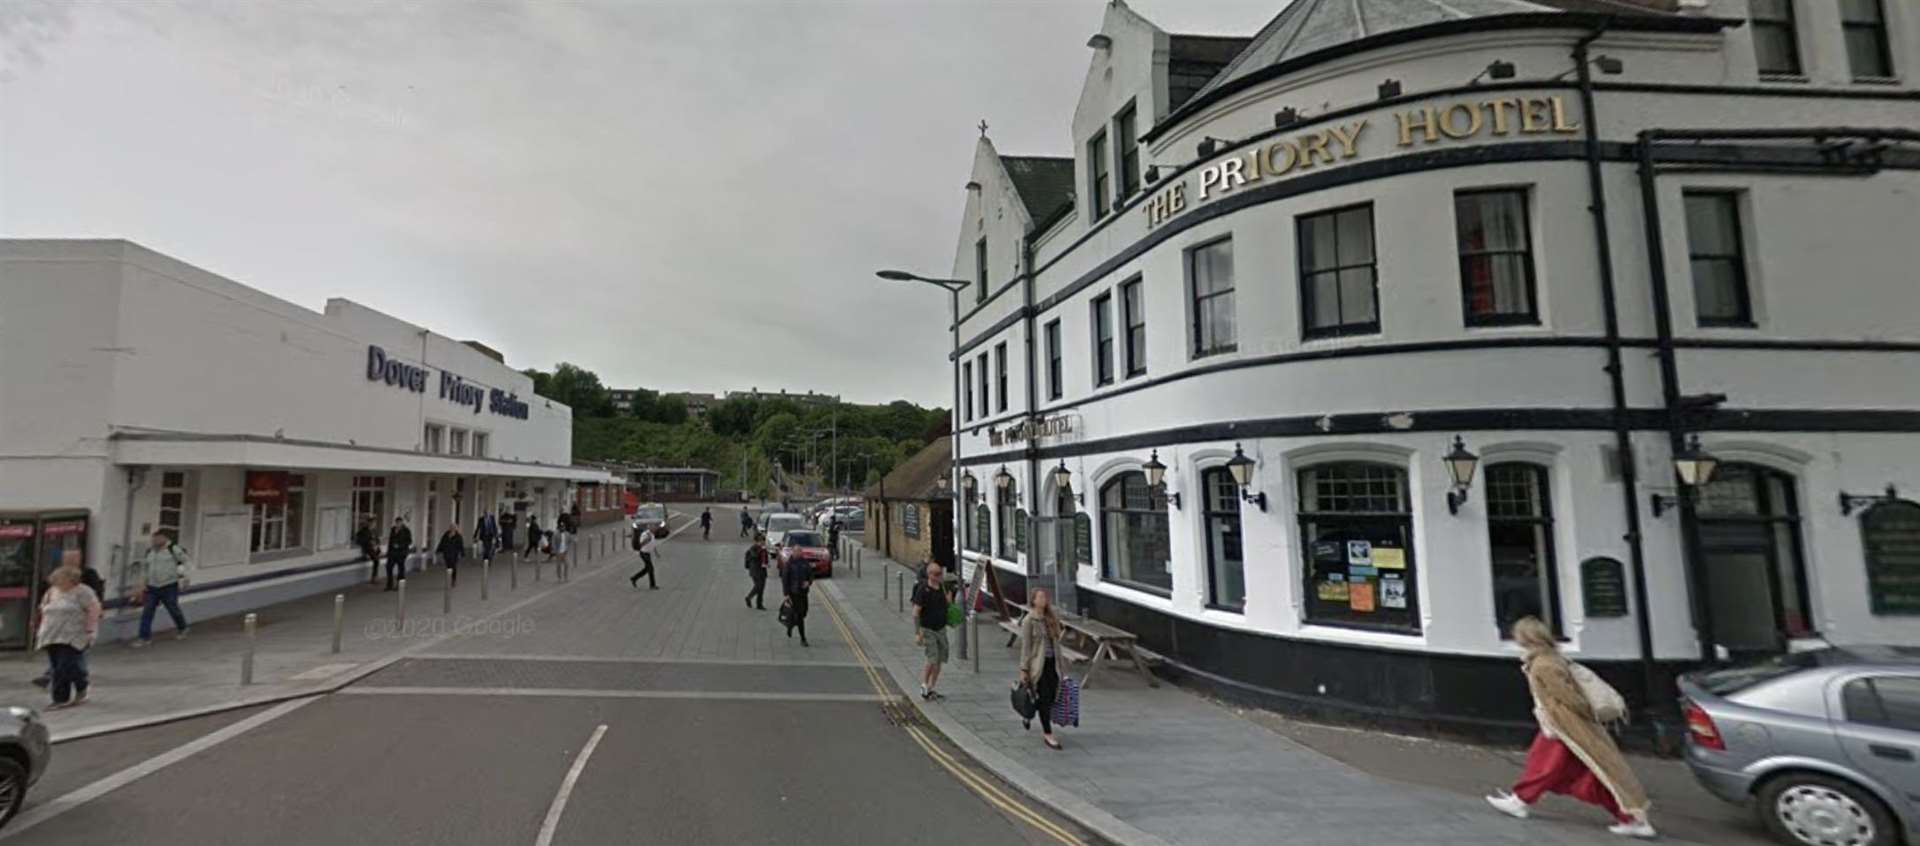 The Priory Hotel public house in Priory Station Approach Road. Picture: Google Street View